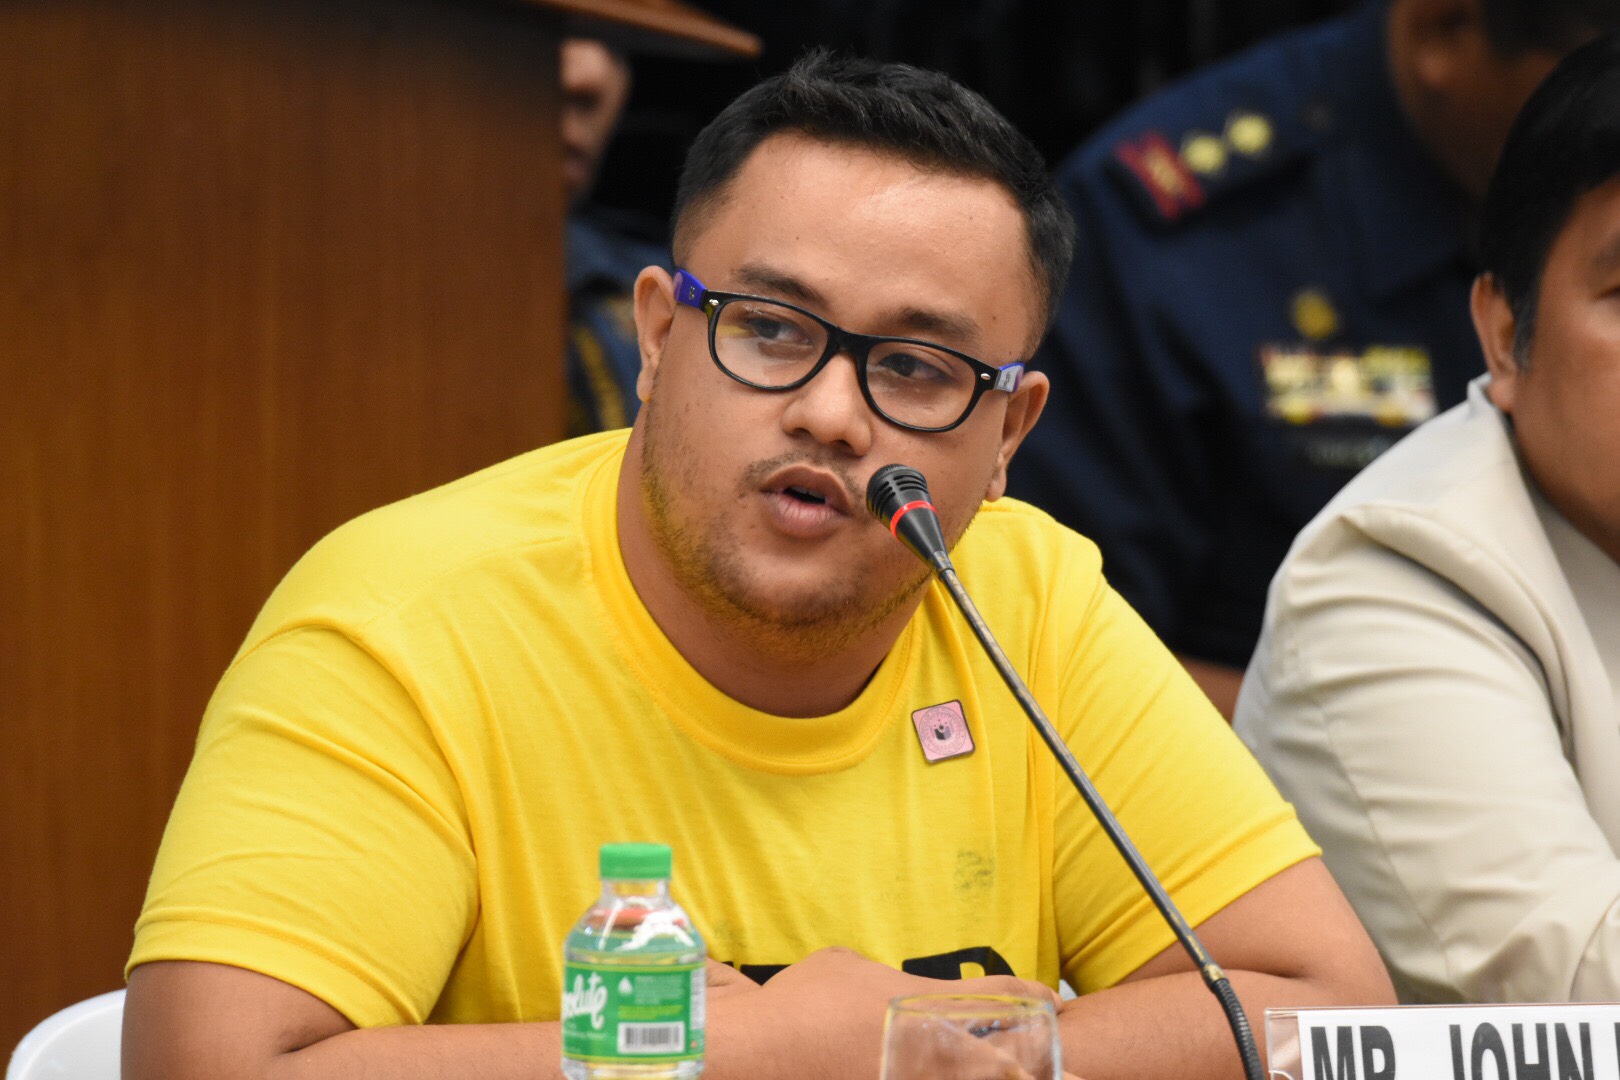 REVELATIONS. John Paul Solano named names of 6 fraternity members and 1 non-member during an executive session with senators on Monday, September 25. Photo by Angie de Silva/Rappler  